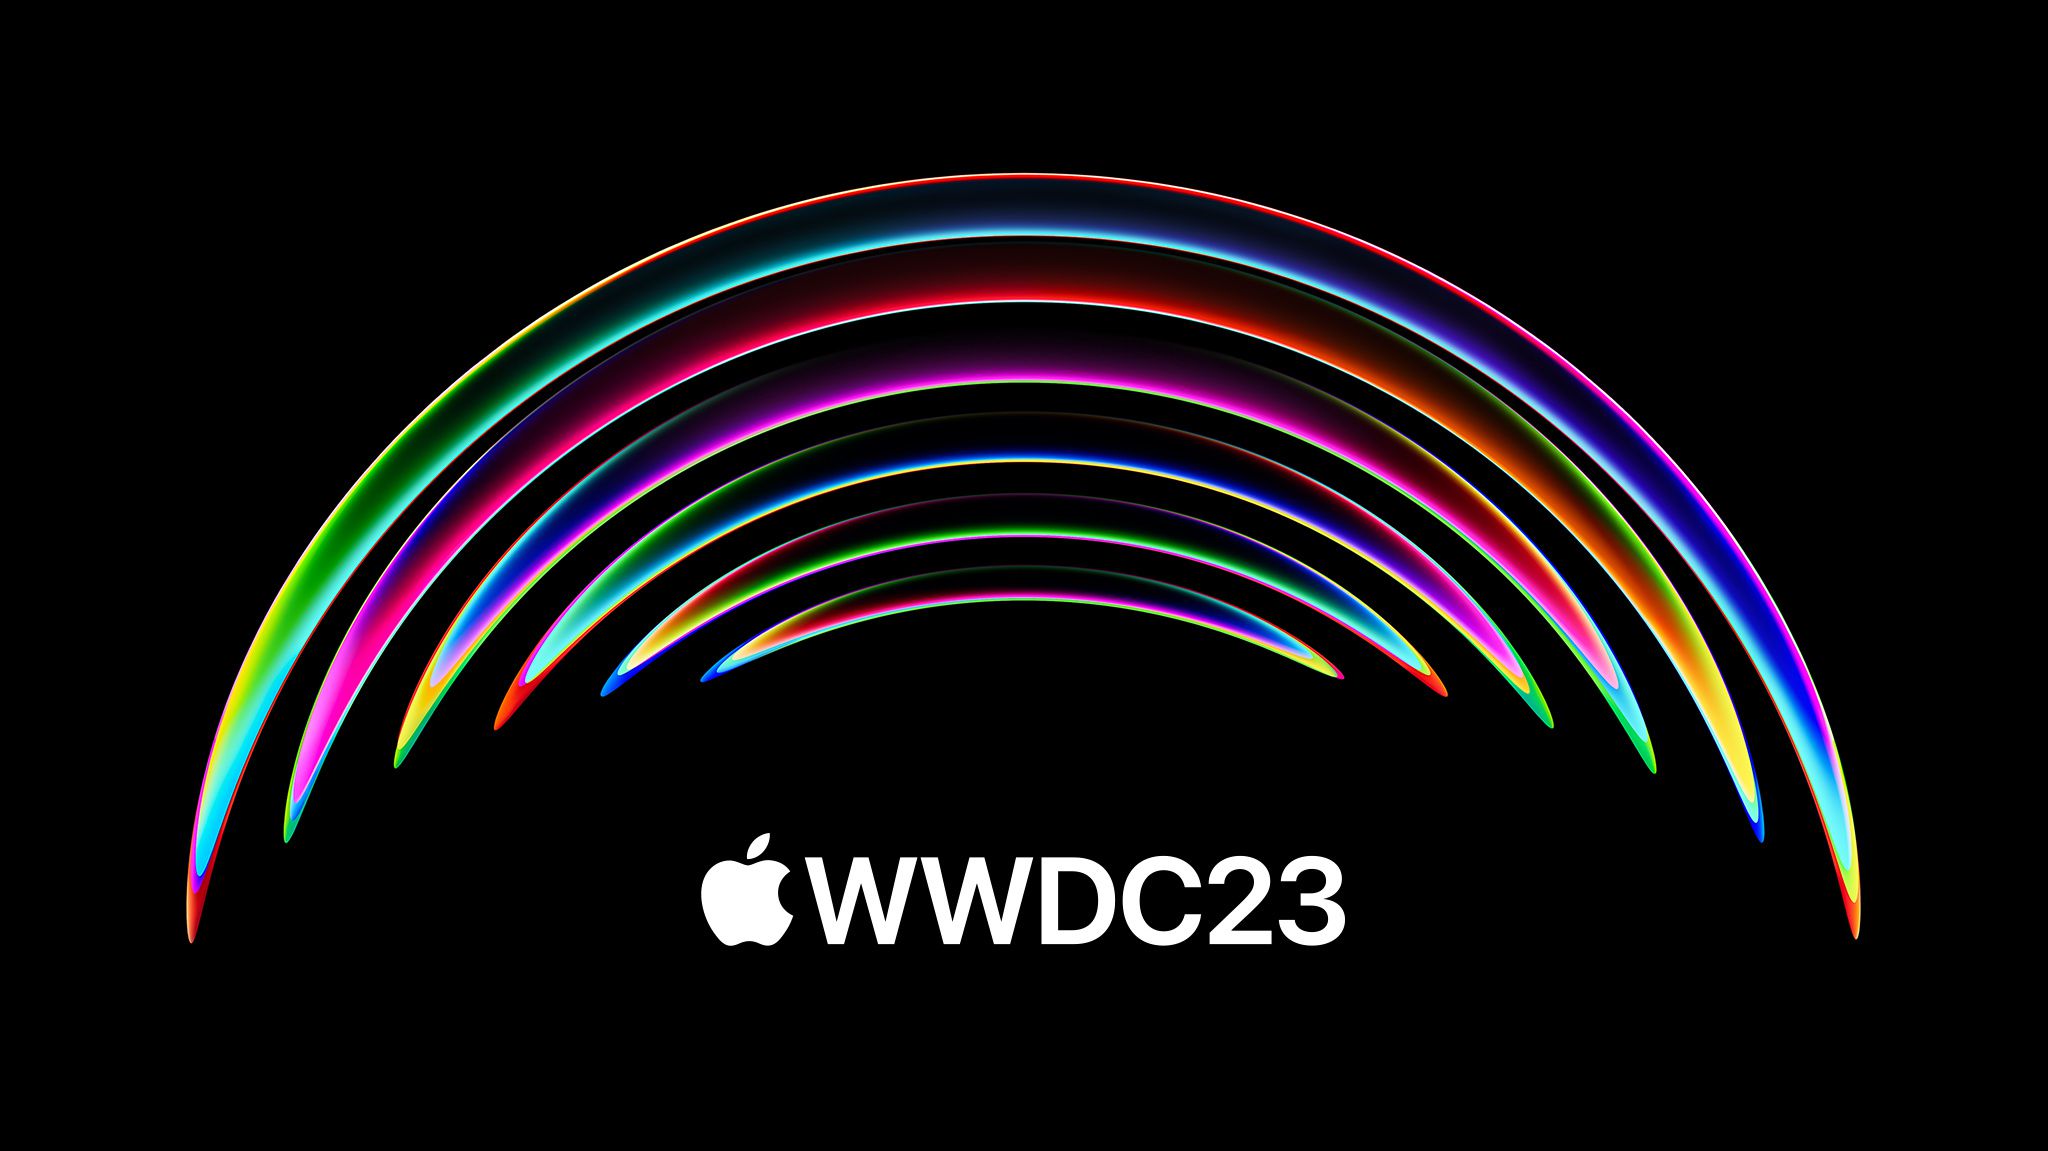 Get Ready for the Latest iOS, iPadOS, macOS, and Hardware Updates at Apple's WWDC 2023! 12